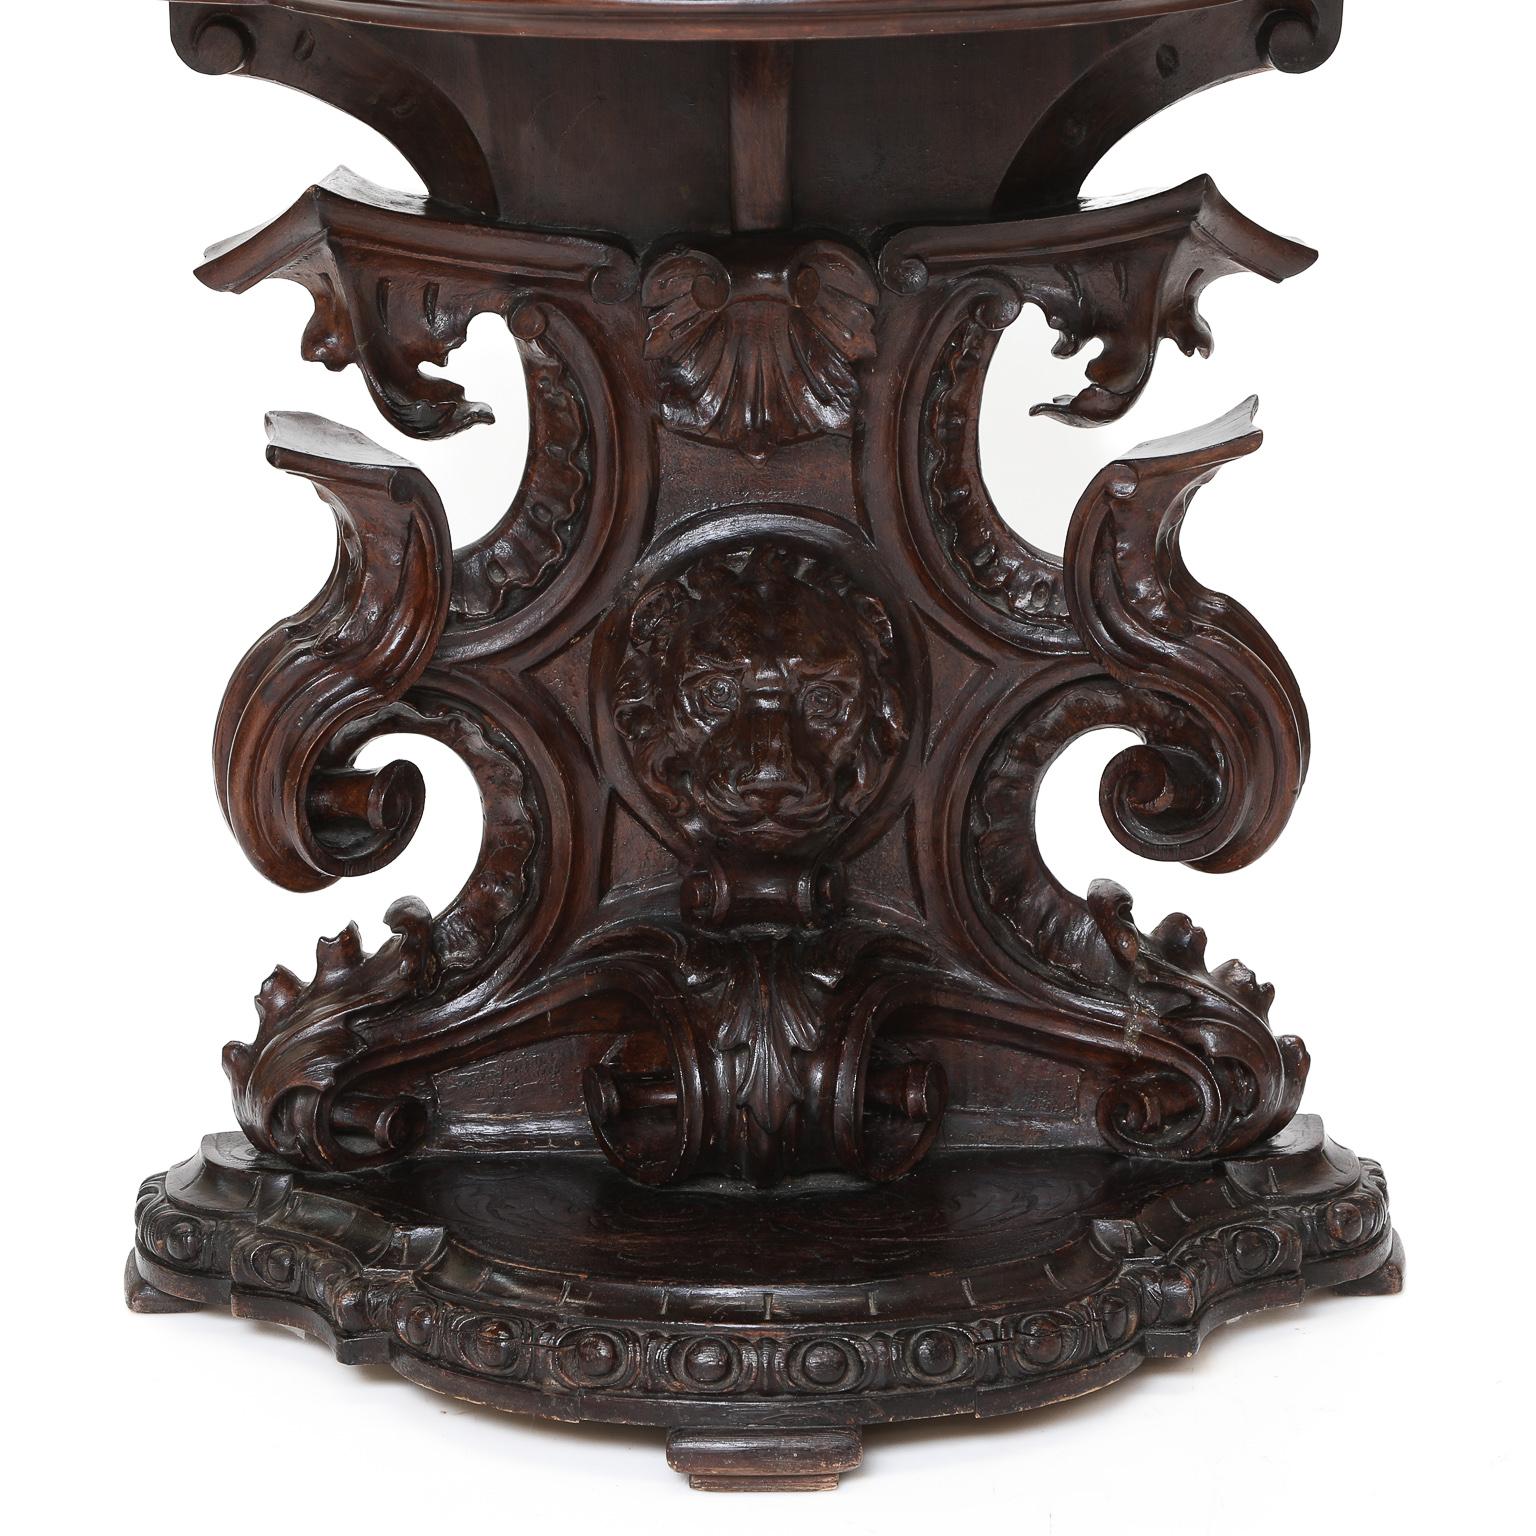 19th century Venetian Walnut Console Table, Having Shaped Top with Vert Tinos Marble Insert, Carved Apron, and Elaborate Base Focused with Lion Face Mask Flanked by Heavy Scrolls, Gadroon Leaves, Acanthus Leaves, Leading to Platform Base. Shape